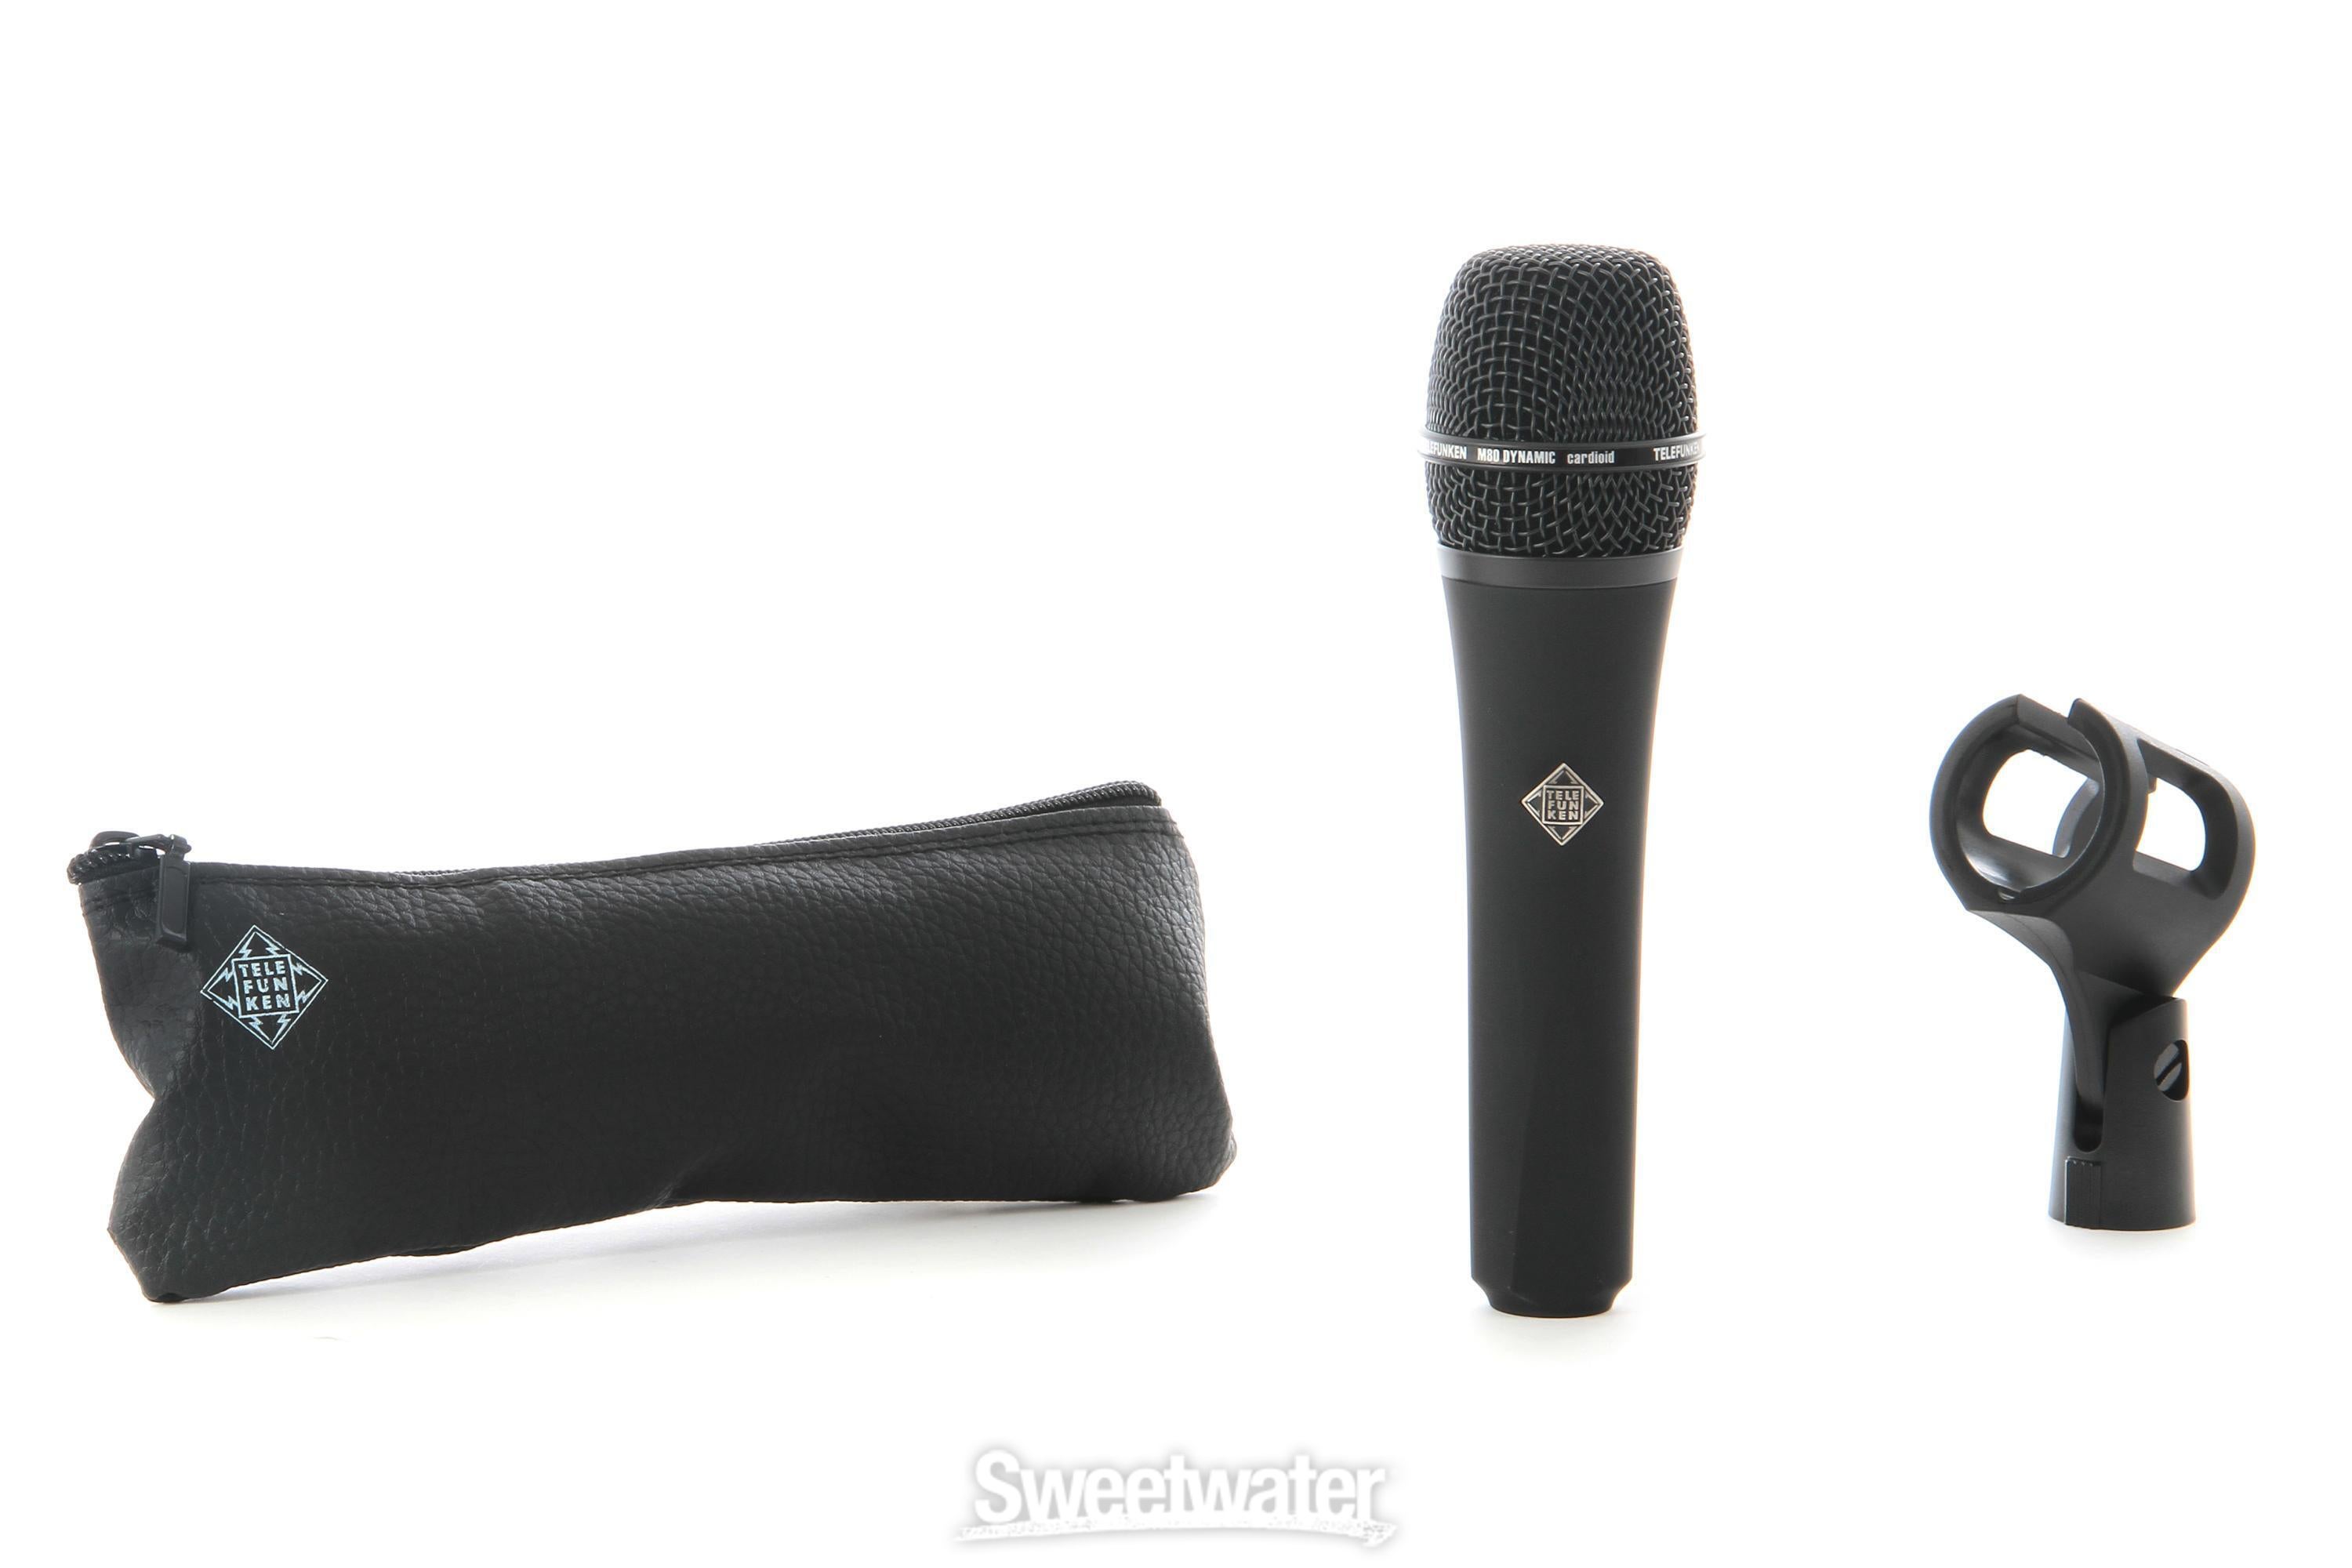 Telefunken M80 Supercardioid Dynamic Microphone Bundle with Stand and Cable  - Black